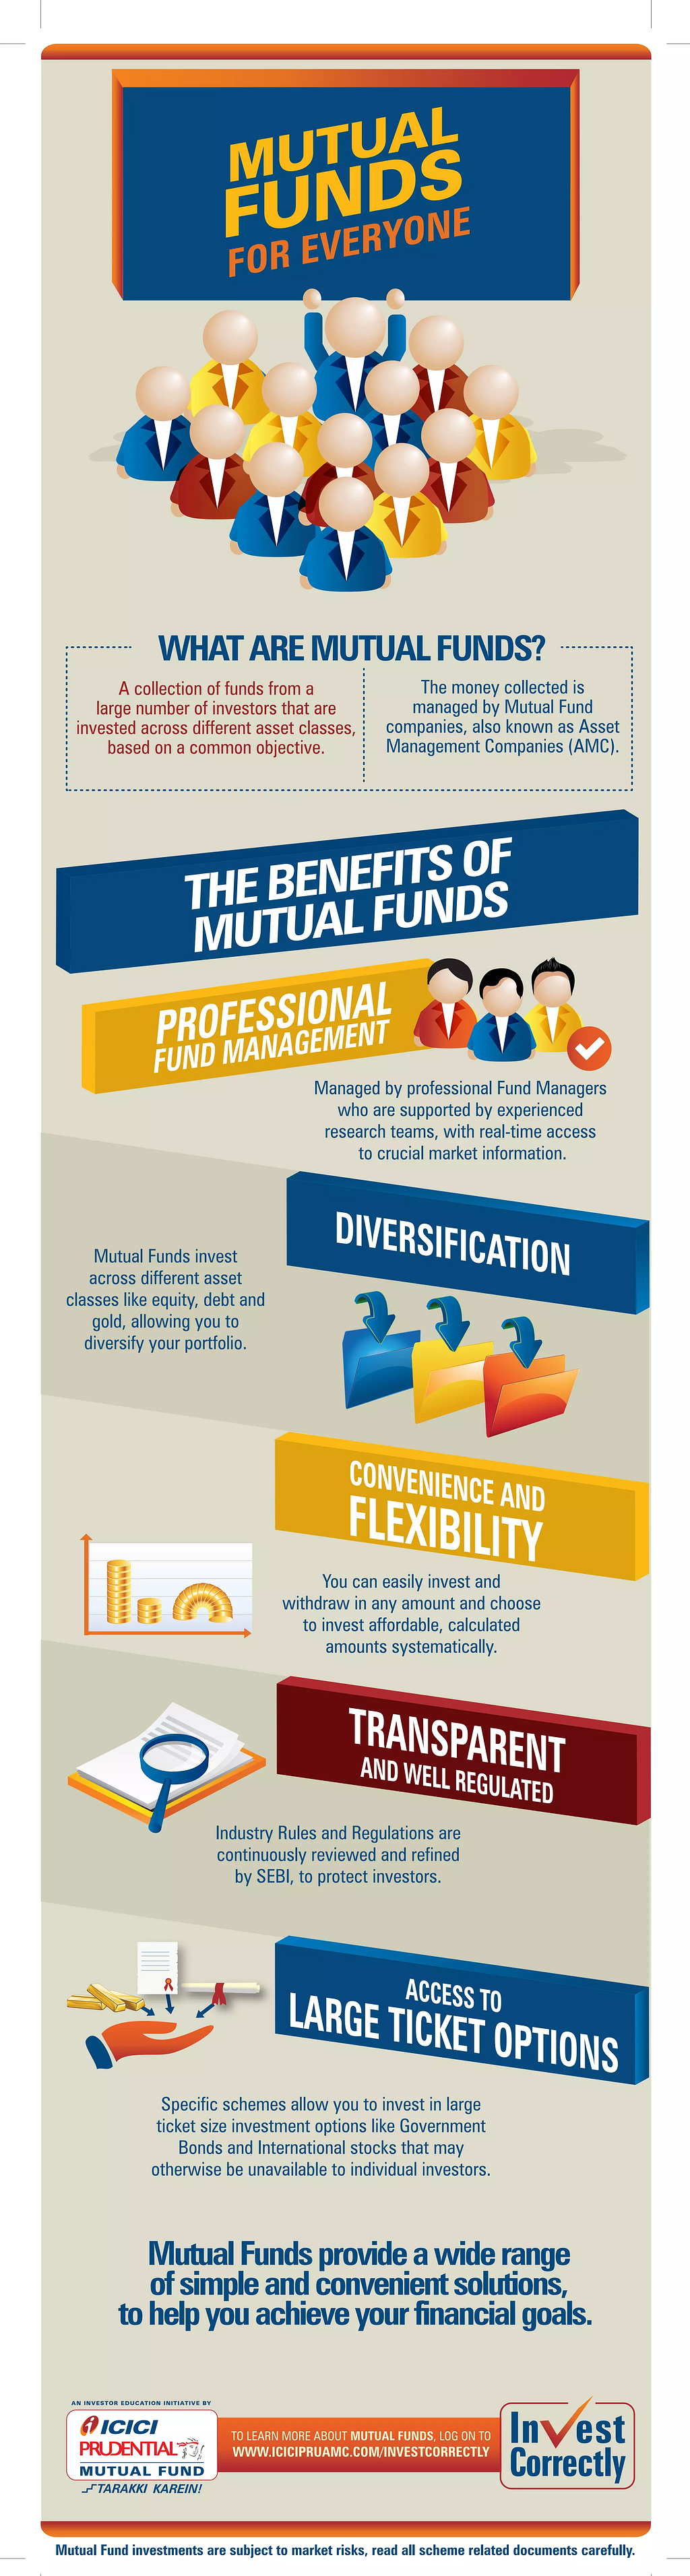 Infographic explaining mutual funds and their benefits.